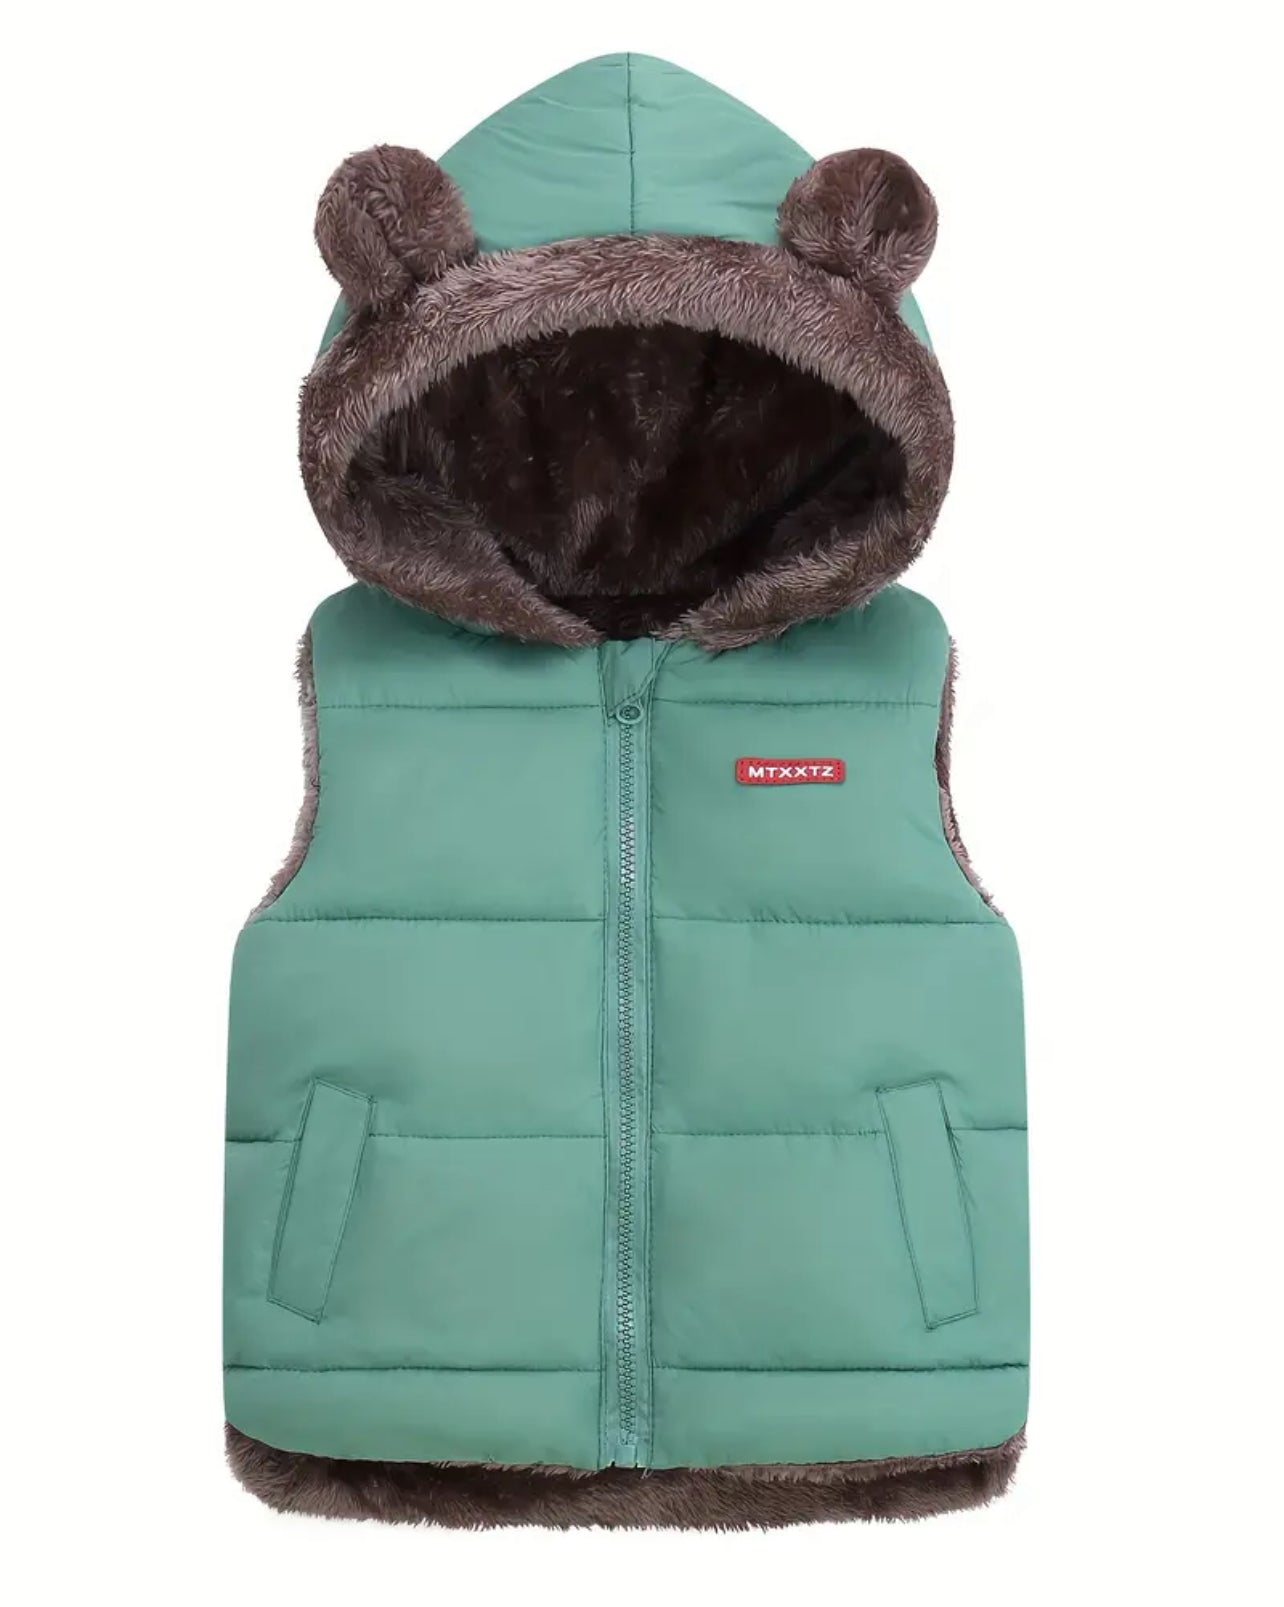 Cute Ears Hooded Vest Coat, Thick Plush Lined Sleeveless Casual Padded For Winter